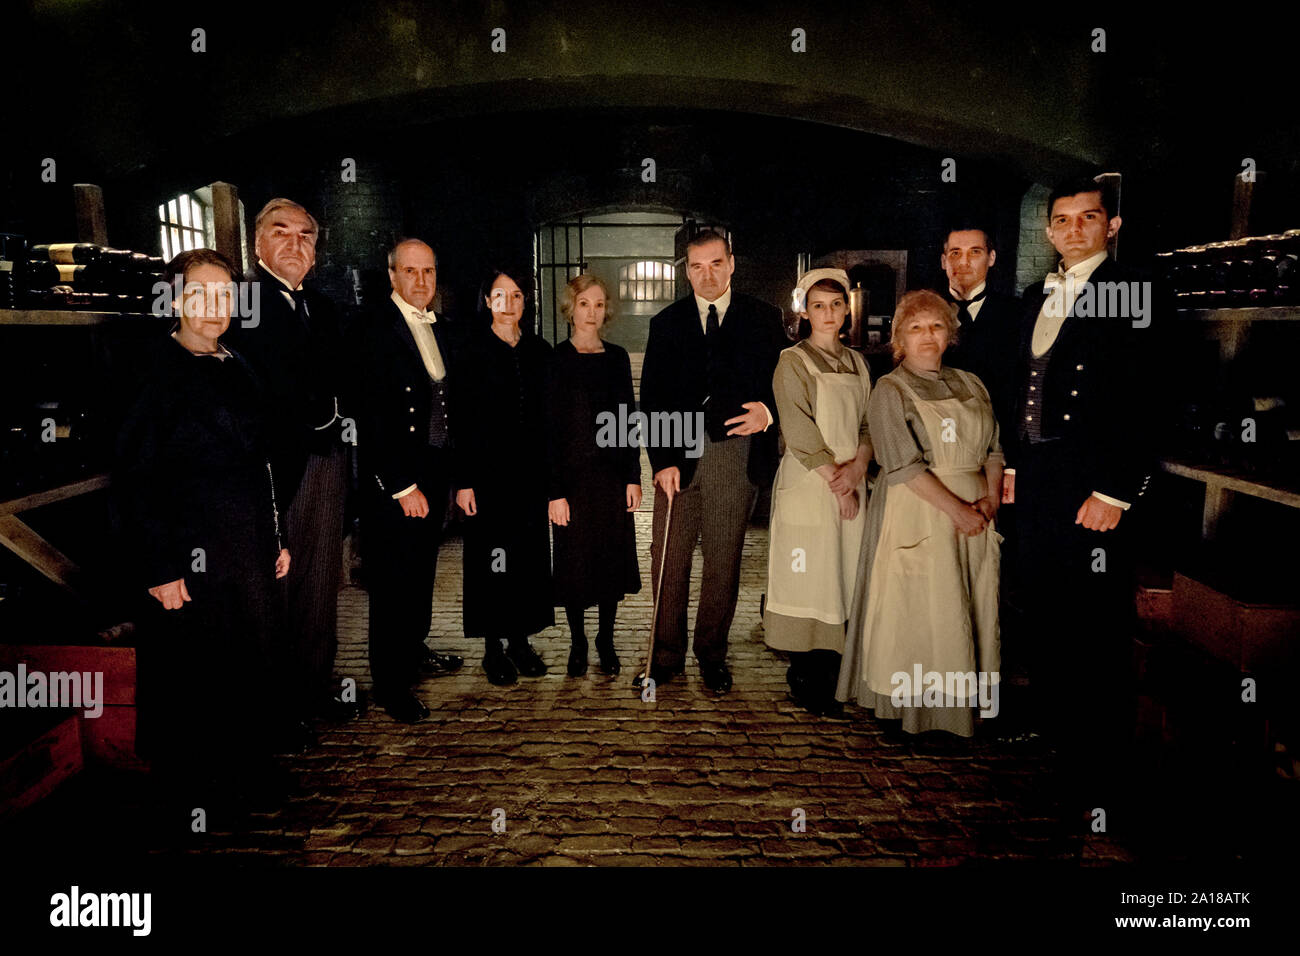 (L to R) Phyllis Logan stars as Mrs. Hughes, Jim Carter as Mr. Carson, Kevin Doyle as Mr. Molesley, Raquel Cassidy as Miss Baxter, Joanne Froggatt as Anna Bates, Brendan Coyle as Mr. Bates, Sophie McShera as Daisy, Lesley Nicol as Mrs. Patmore, Robert James-Collier as Thomas Barrow and Michael C. Fox as Andy in DOWNTON ABBEY, a Focus Features release. (2019)  Credit : Jaap Buitendijk / Focus Features, LLC /The Hollywood Archive Stock Photo